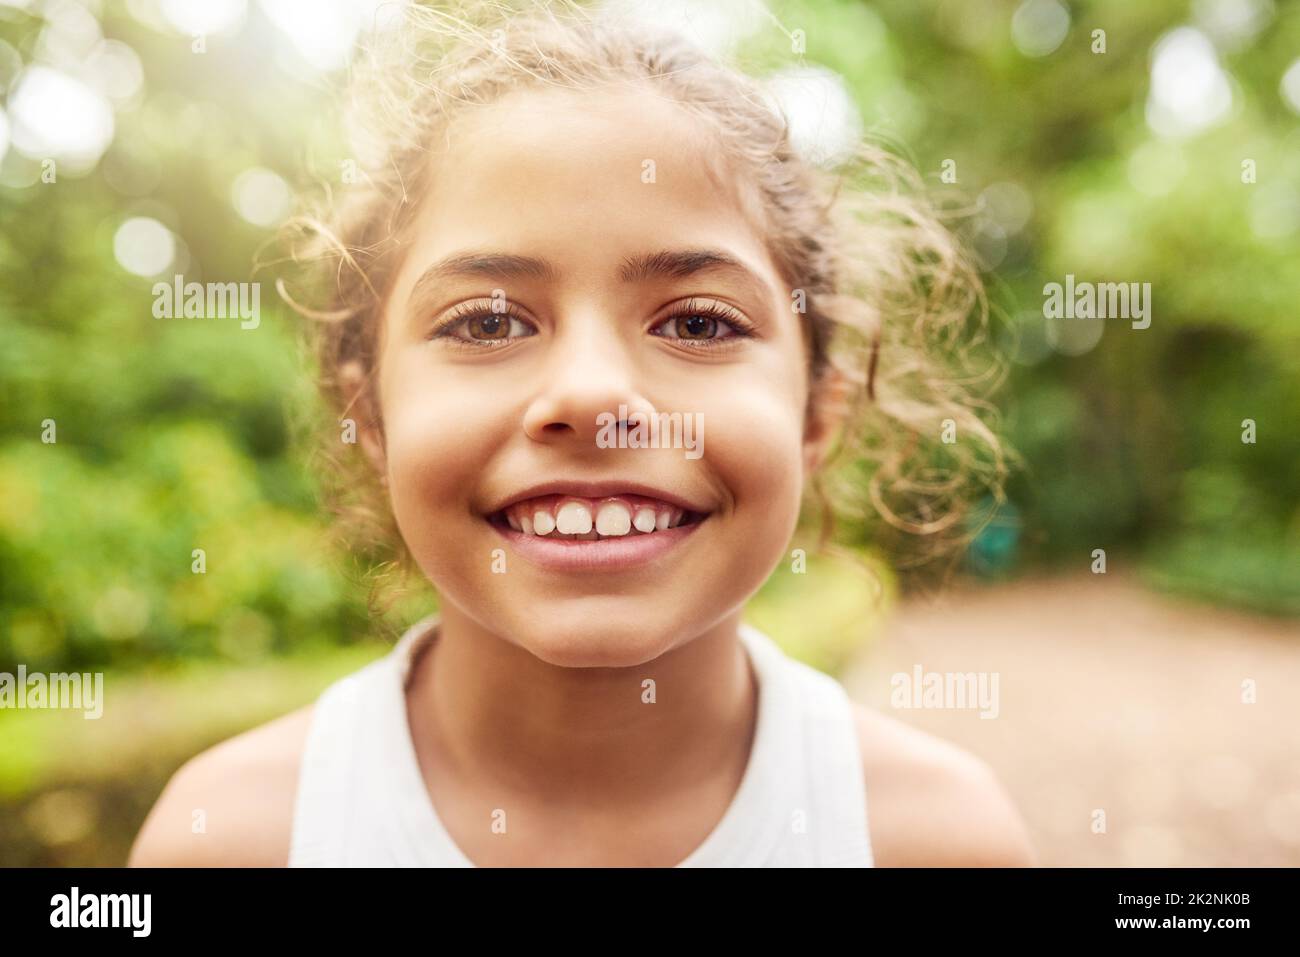 I love being in the park. Cropped portrait of an adorable little girl standing outside in the park. Stock Photo